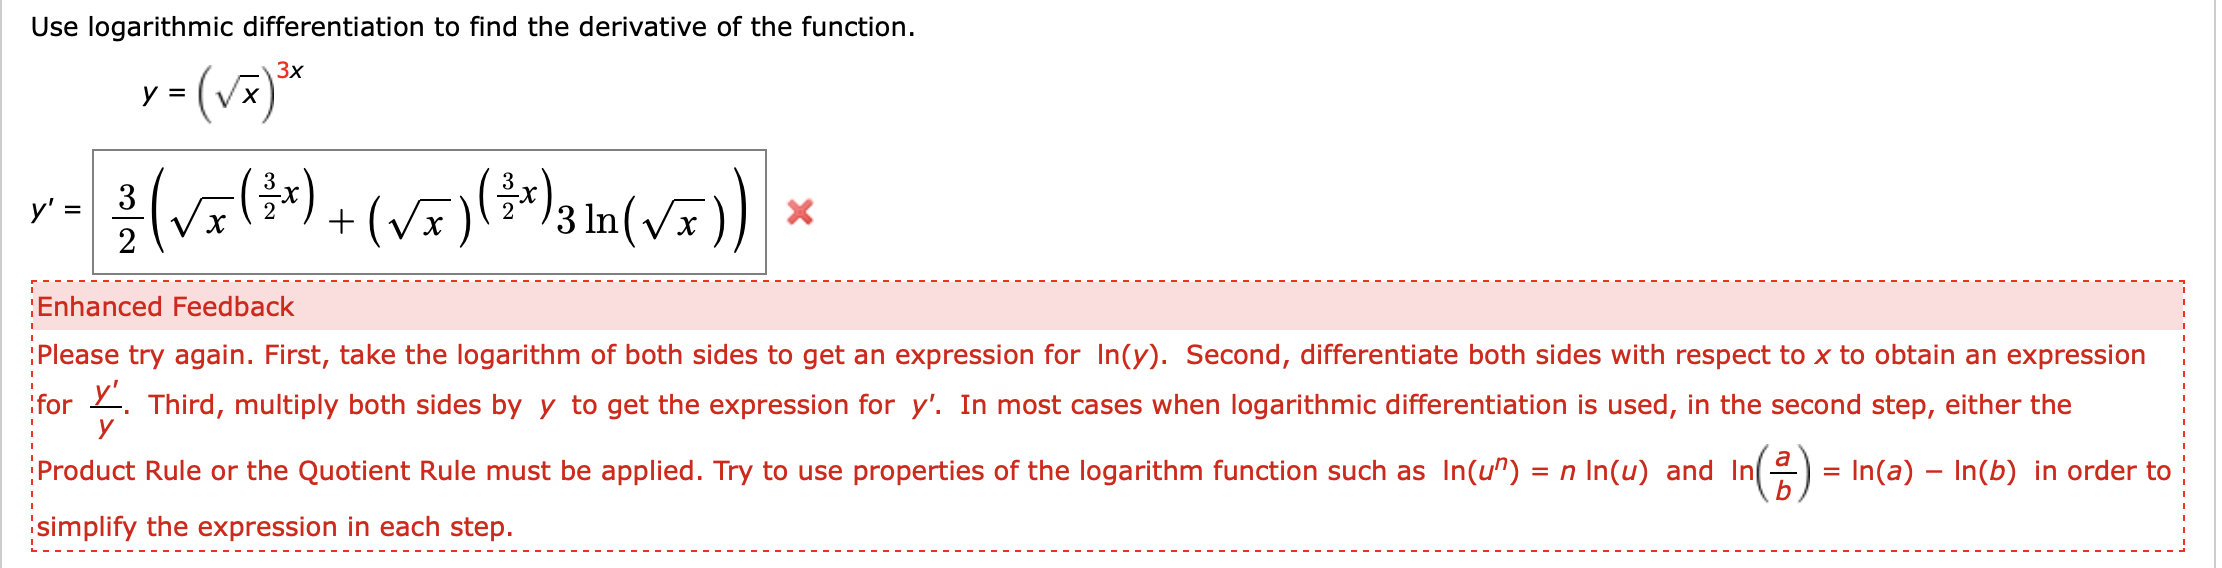 Use logarithmic differentiation to find the derivative of the function
y()
3x
y =
)
3
y' =
2
Enhanced Feedback
Please try again. First, take the logarithm of both sides to get an expression for In(y). Second, differentiate both sides with respect to x to obtain an expression
for Third, multiply both sides by
y
to get the expression for y'. In most cases when logarithmic differentiation is used, in the second step, either the
a
Product Rule or the Quotient Rule must be applied. Try to use properties of the logarithm function such as In(u") = n In(u) and In
In(a)- In(b) in order to
simplify the expression in each step.
